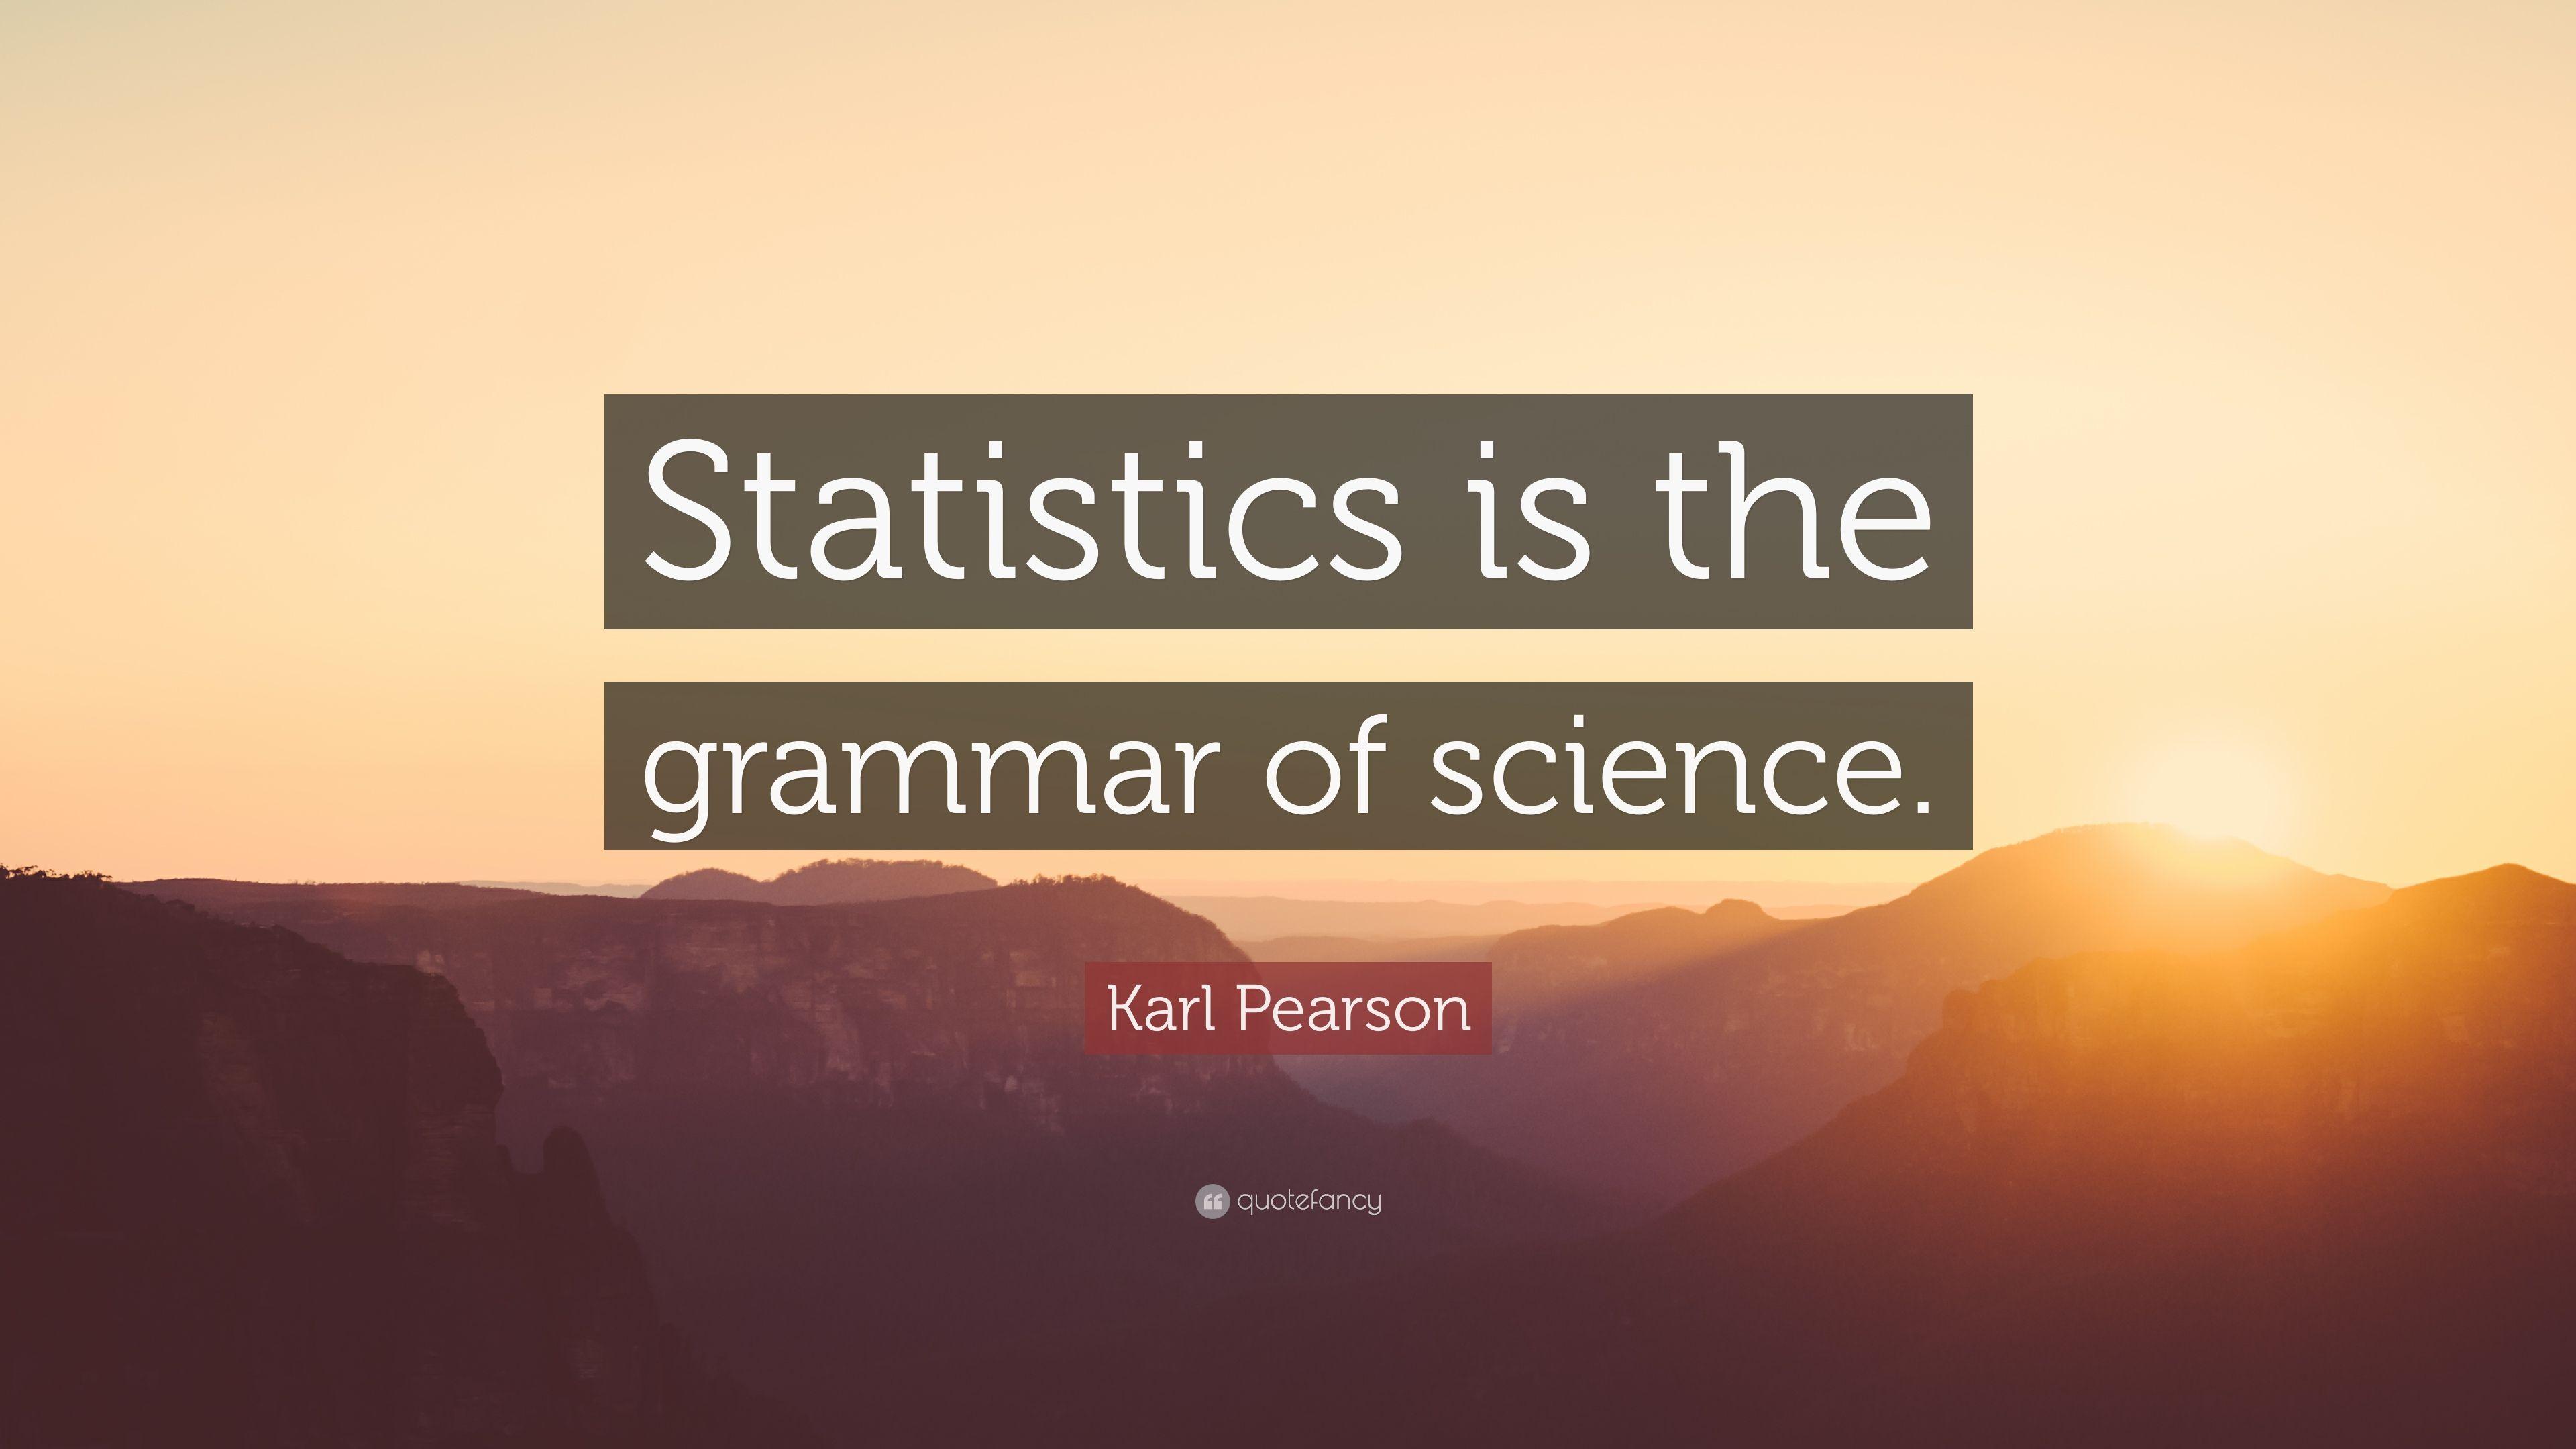 Karl Pearson Quote: “Statistics is the grammar of science.” 12